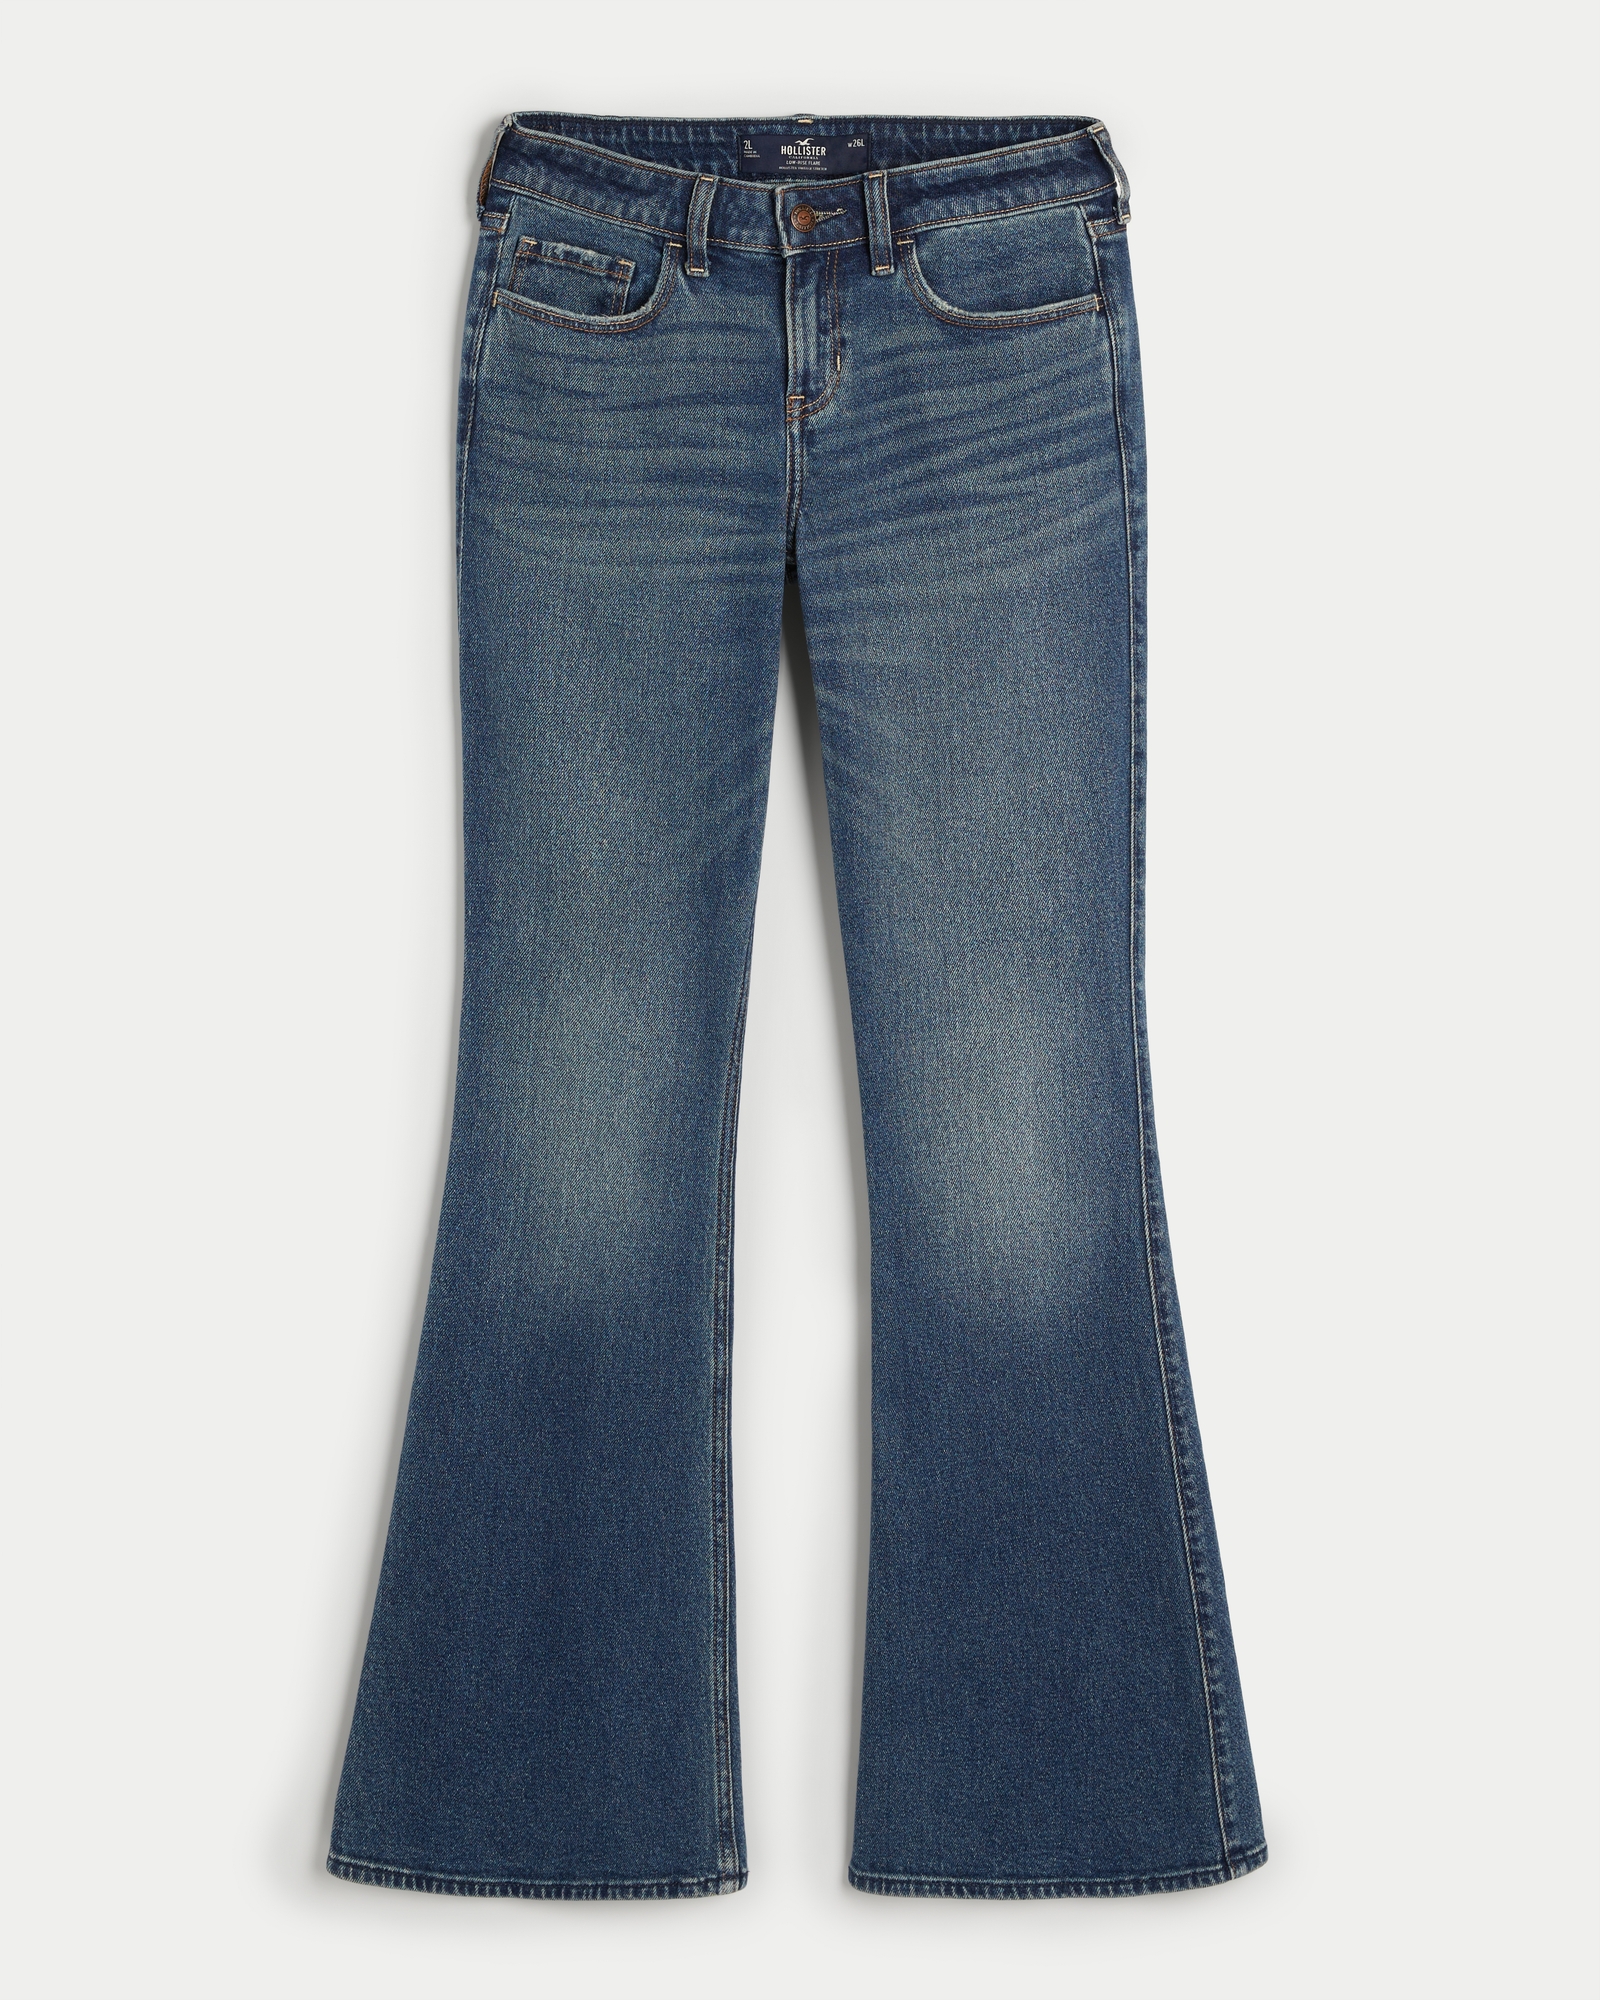 Hollister LOW-RISE MEDIUM WASH FLARE JEANS  Flare jeans, Clothes, Low rise flare  jeans